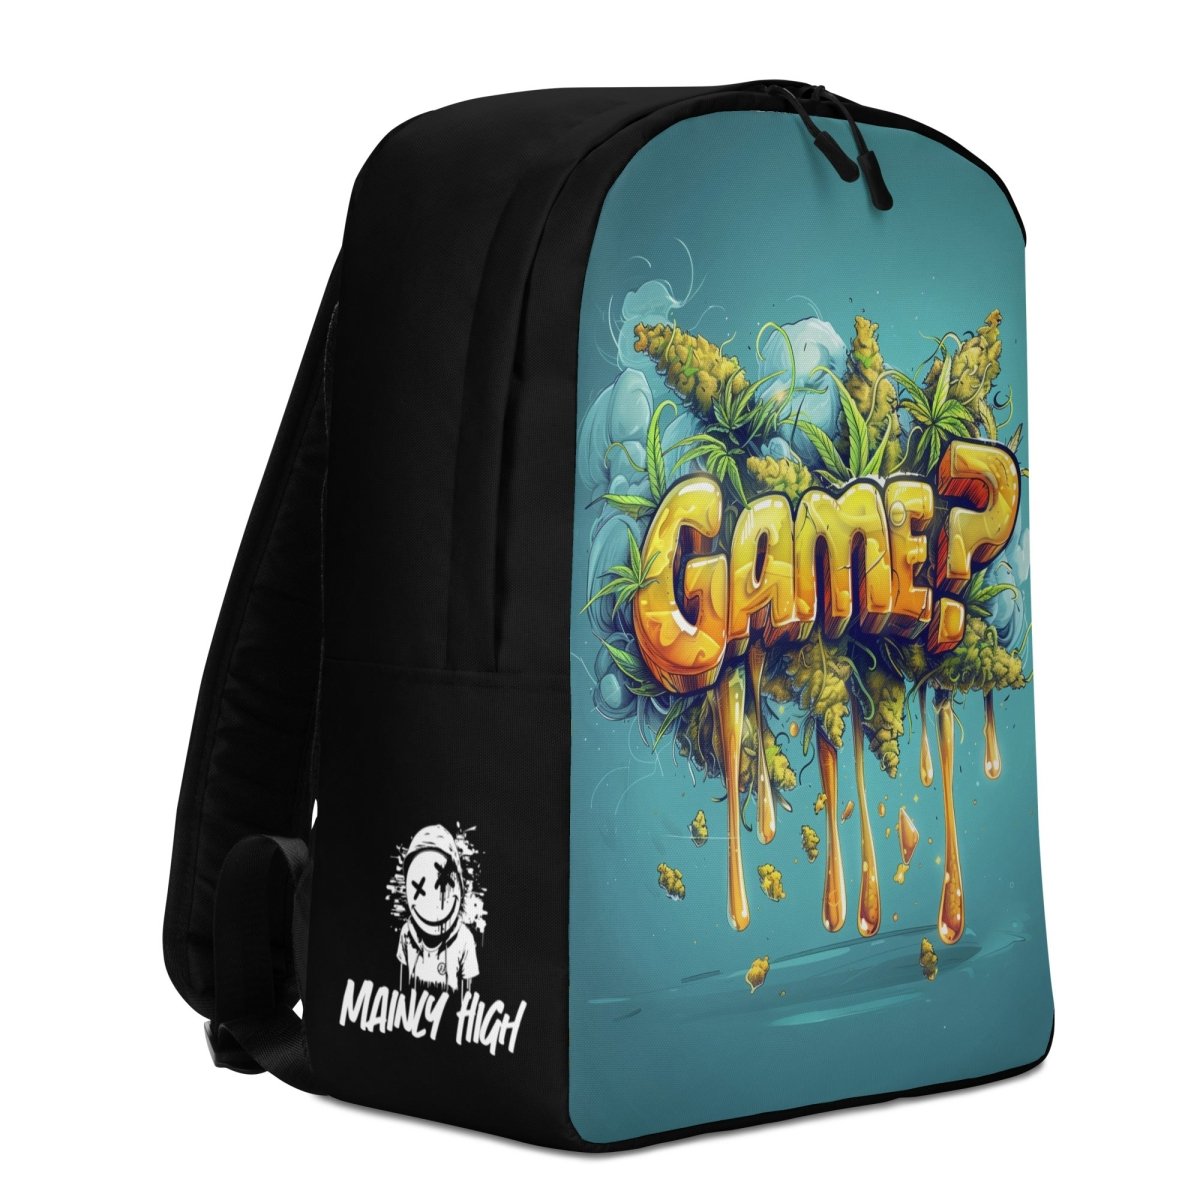 Game? Backpack - Mainly High